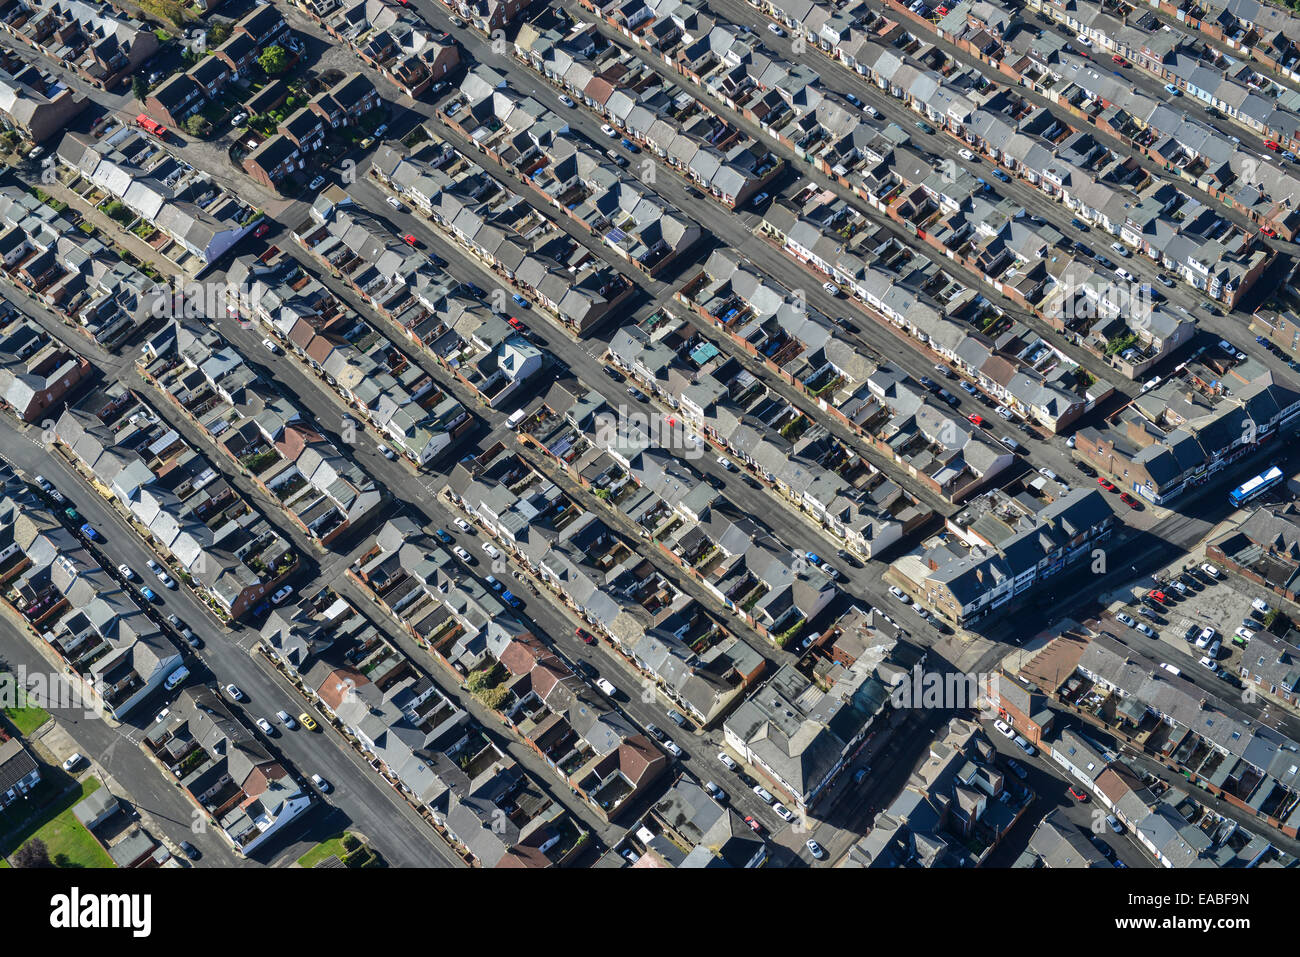 An aerial view of back to back terraced housing in Sunderland, a city in North East England Stock Photo